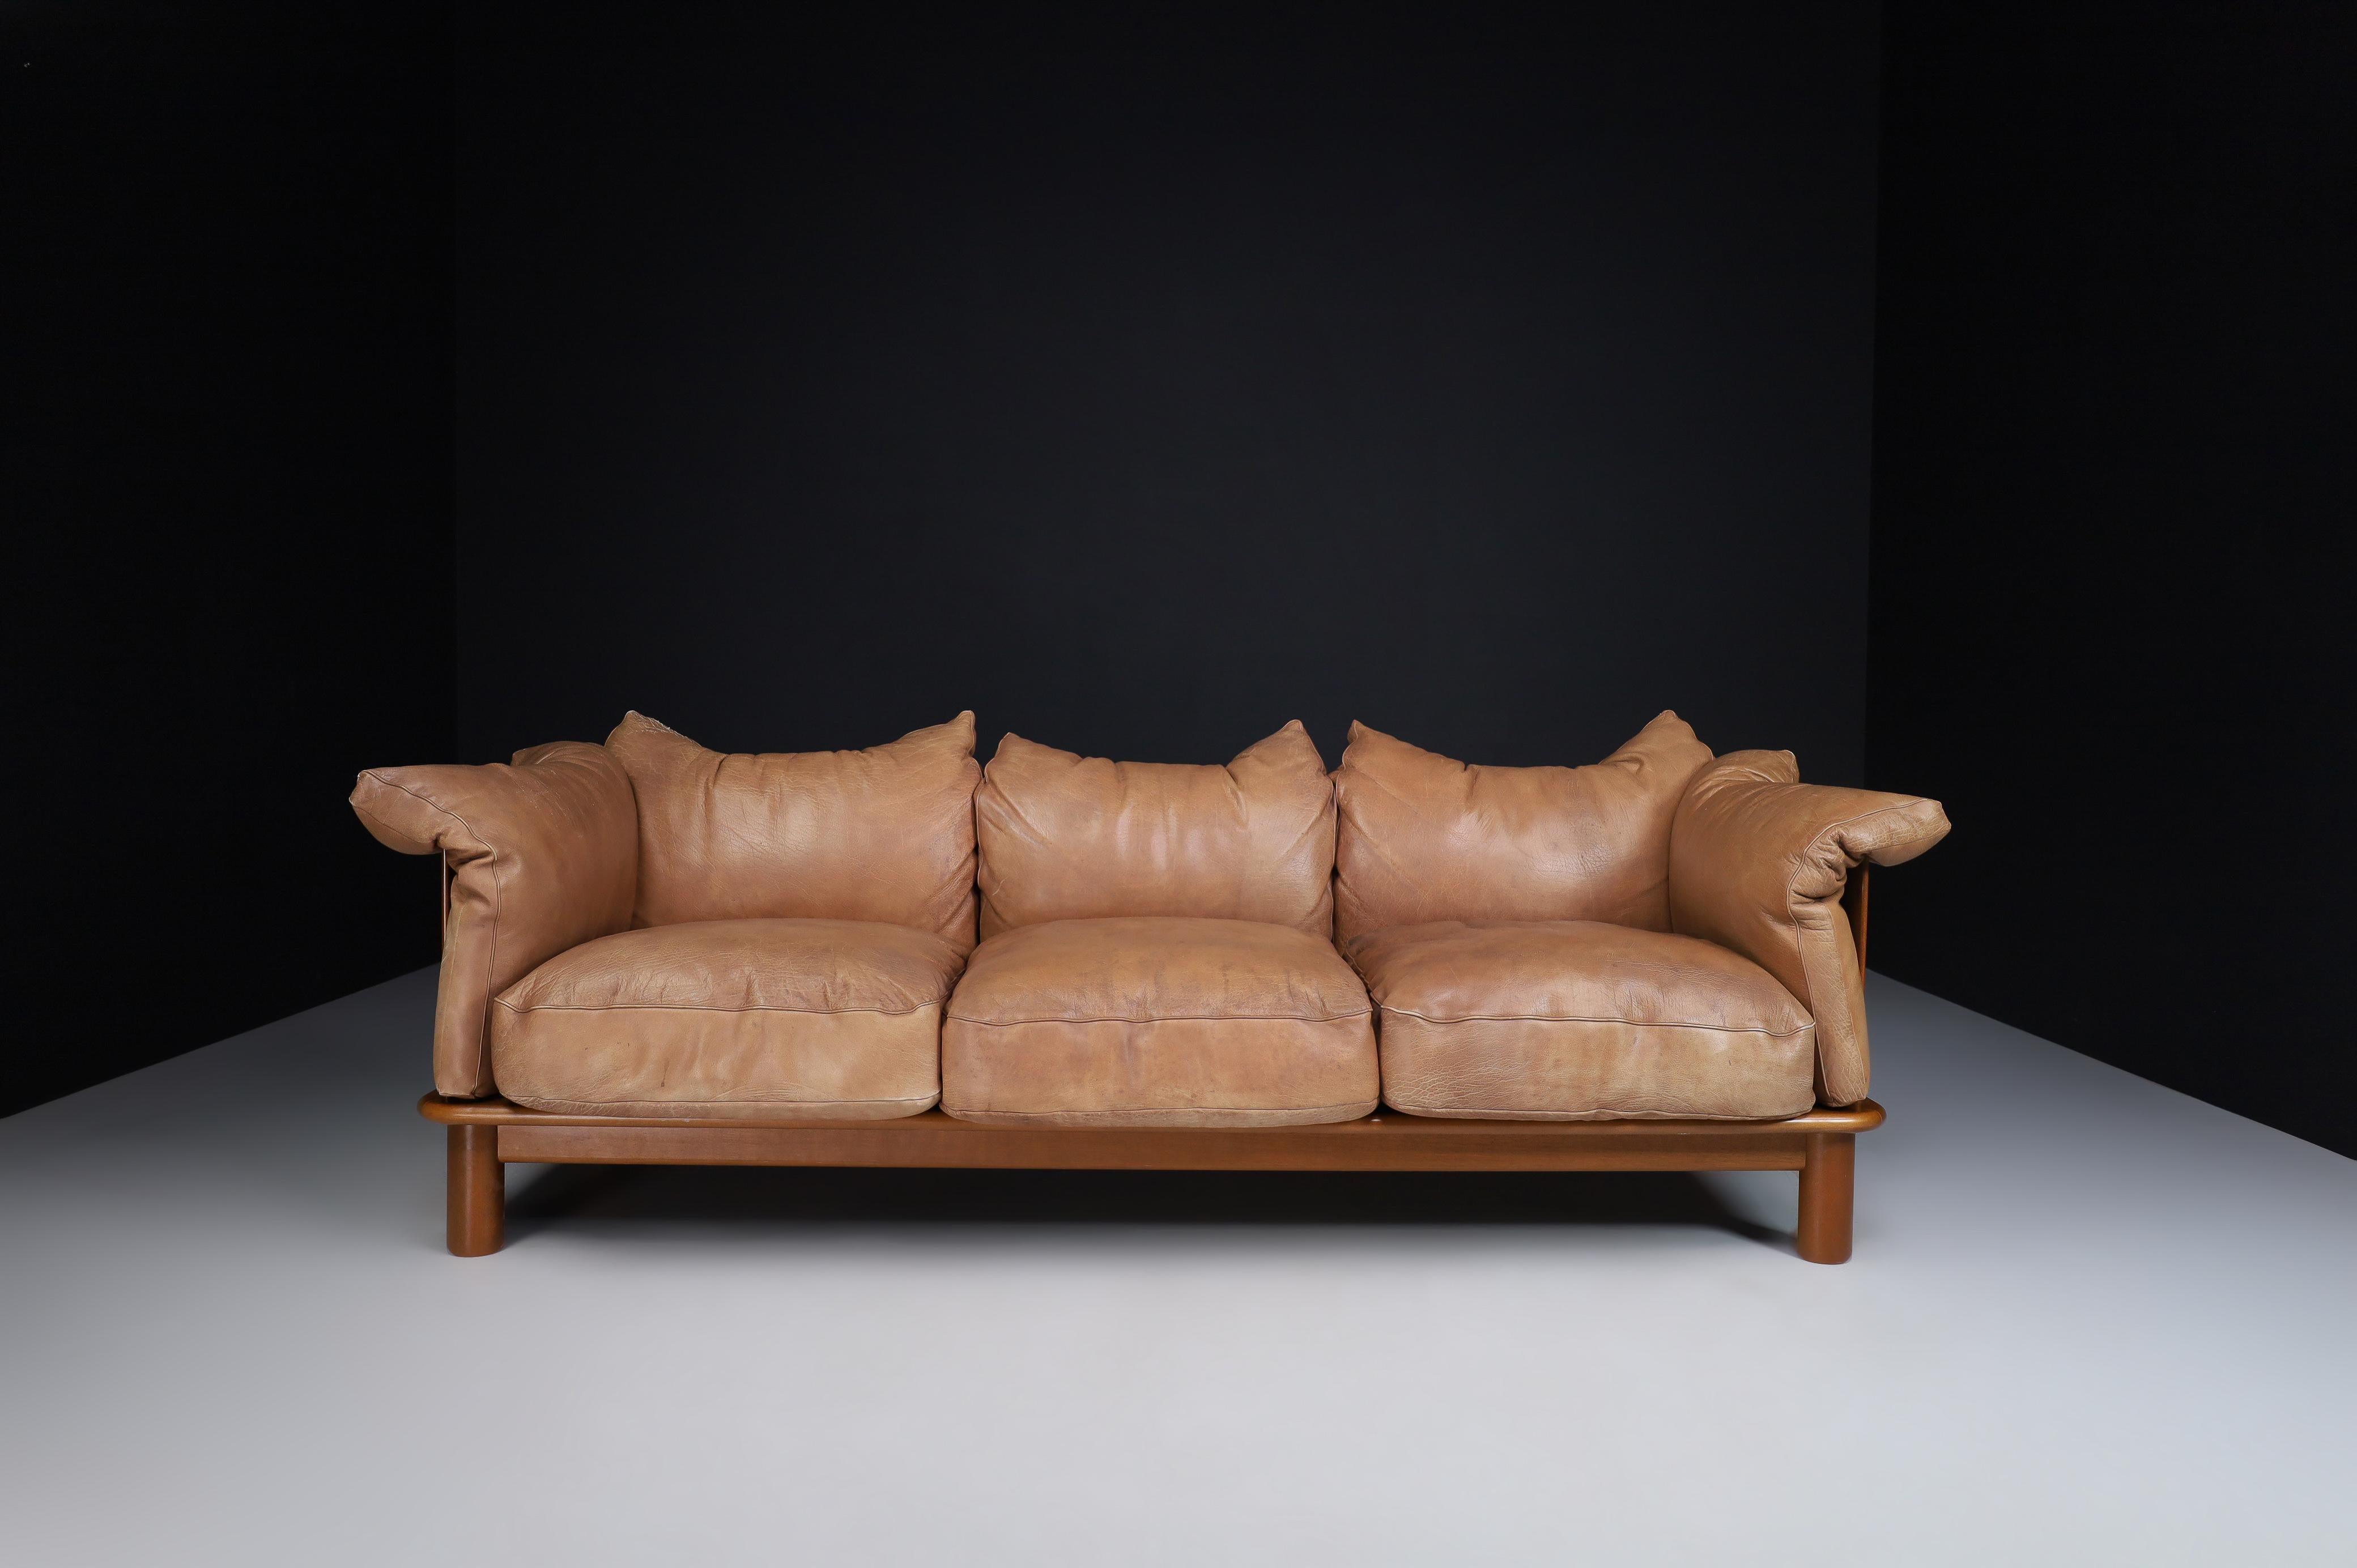 Mid-Century Modern three-seat XL sofa, patinated brown leather, walnut, De Pas, D'Urbino & Lomazzi, Padova, Italy 1970s.

Comfortable and gorgeous seating piece by these Italian masters. The patina of the leather is just how we like it to be. All